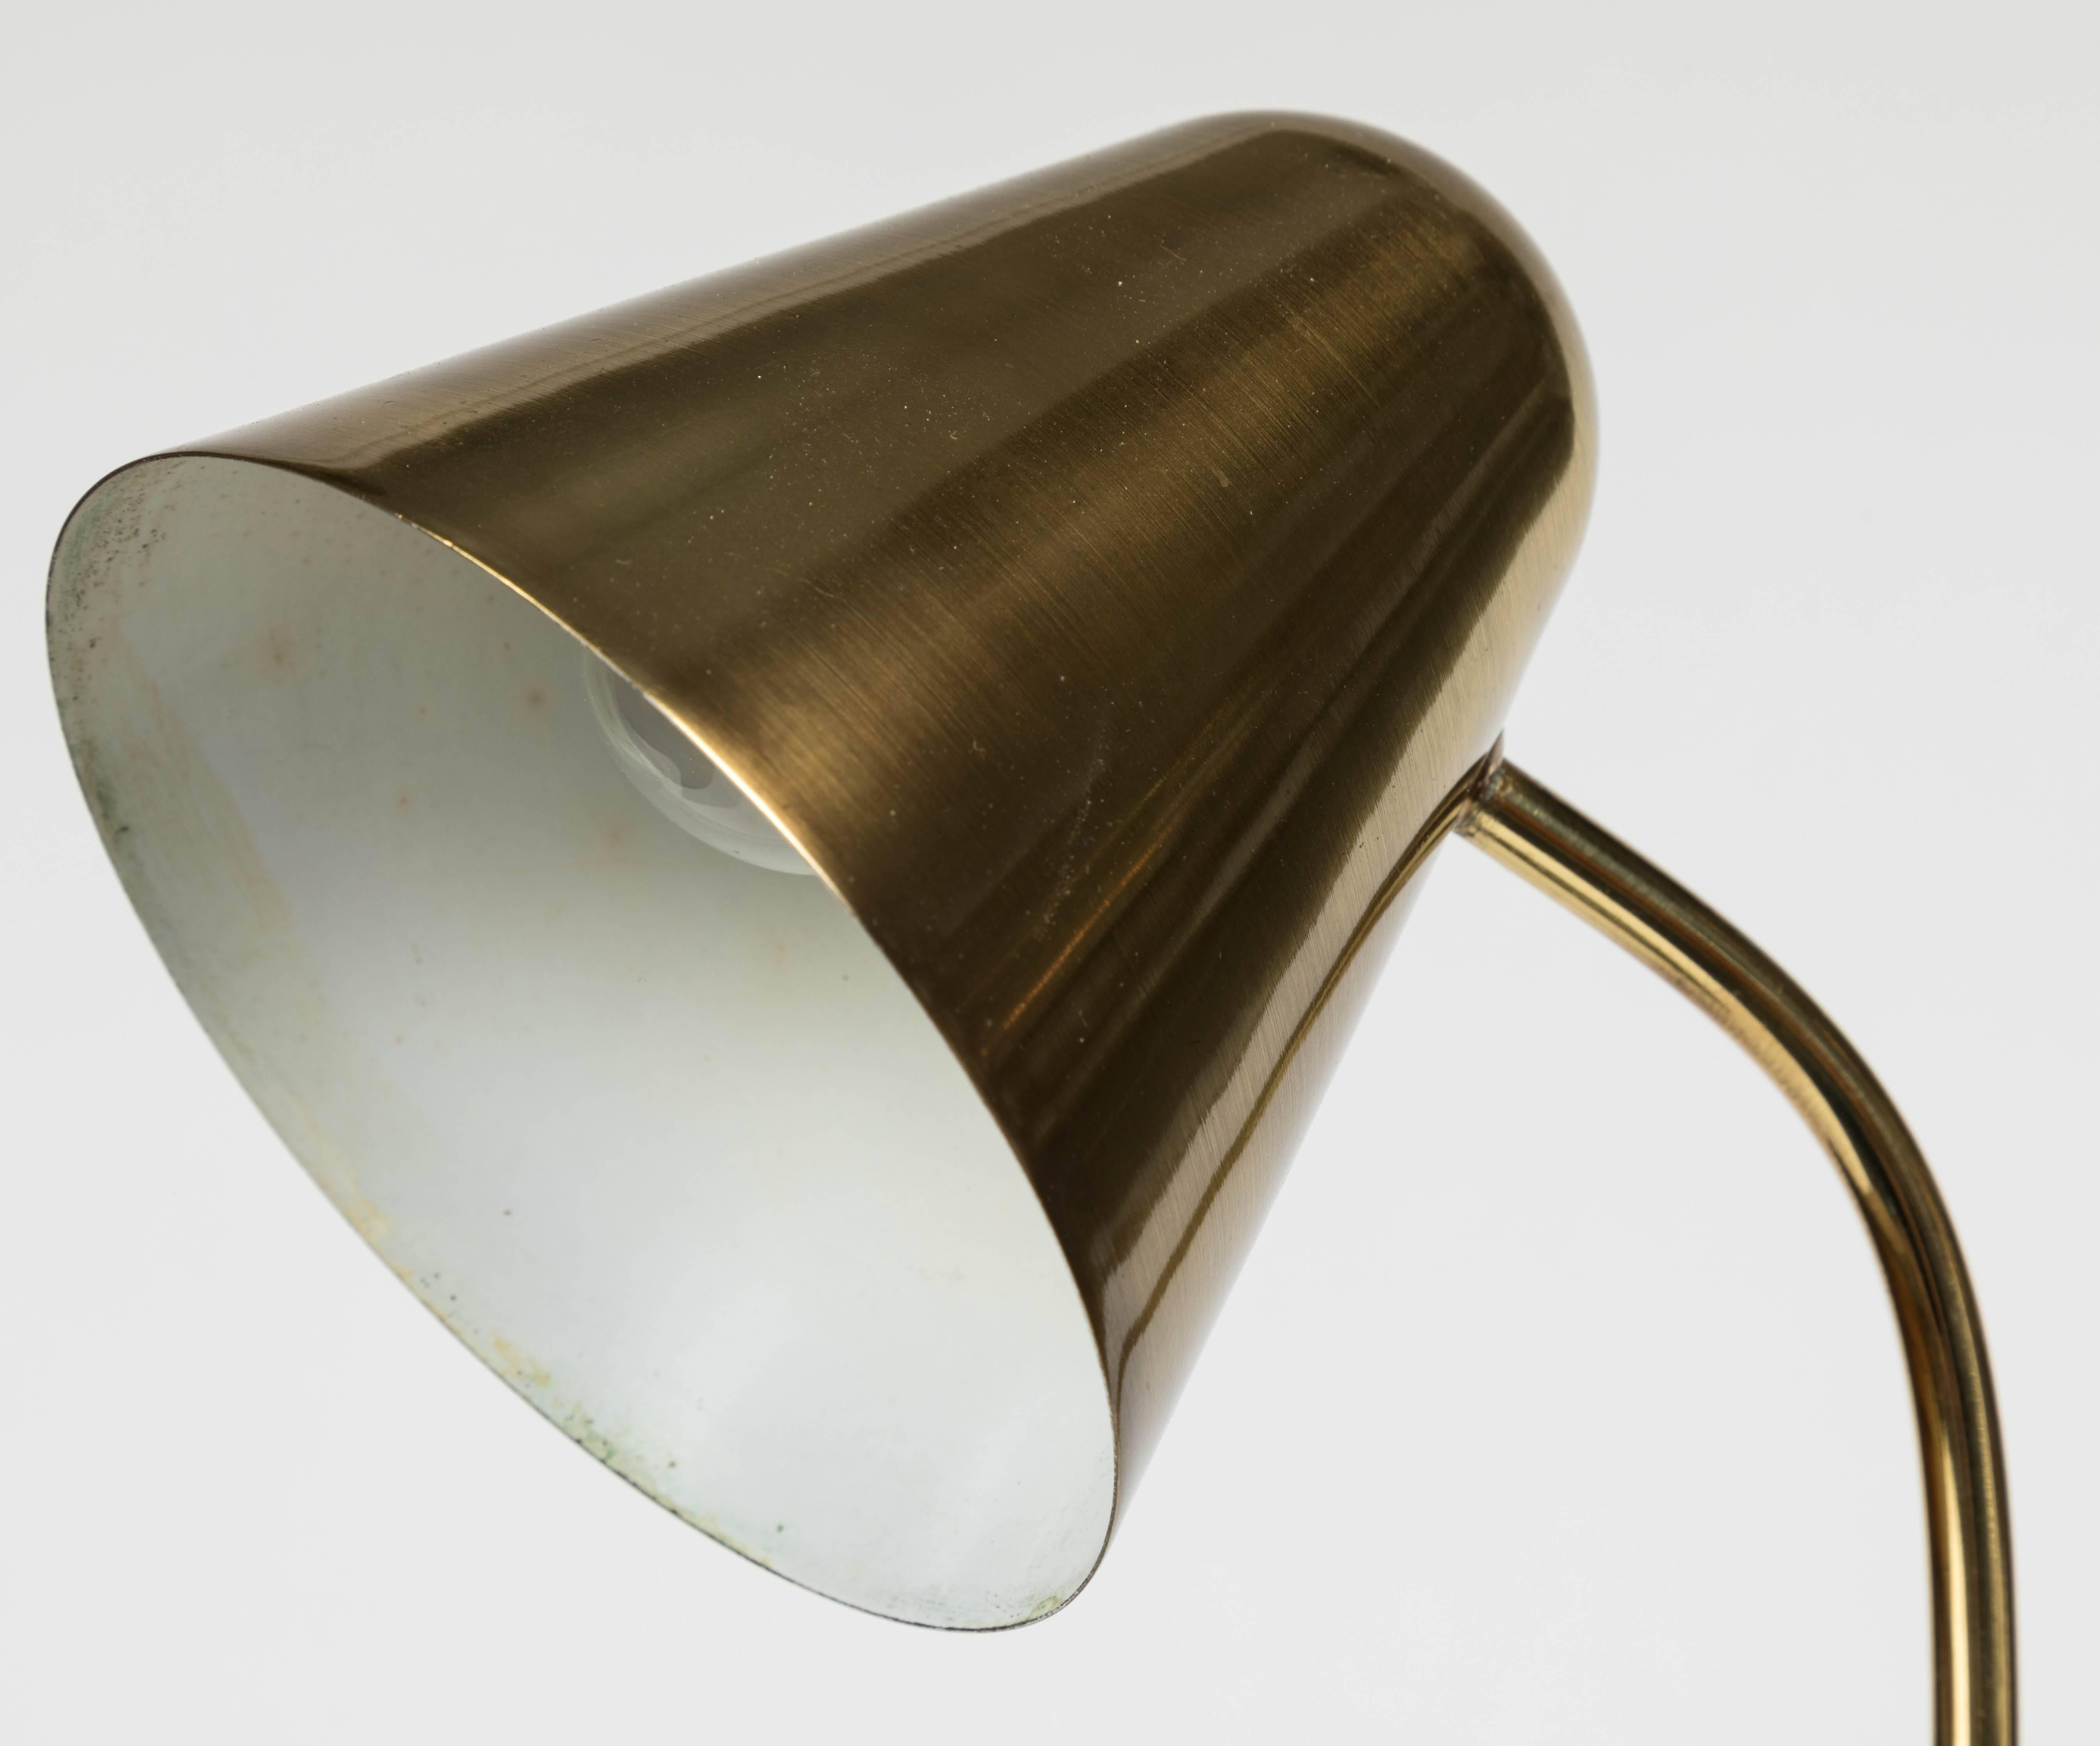 1950s brass table lamp attributed to Jacques Biny. A exceptionally clean and simple design executed in patinated brass with white painted inner shade. Quintessentially midcentury French in its conception and execution attributed to the incomparable